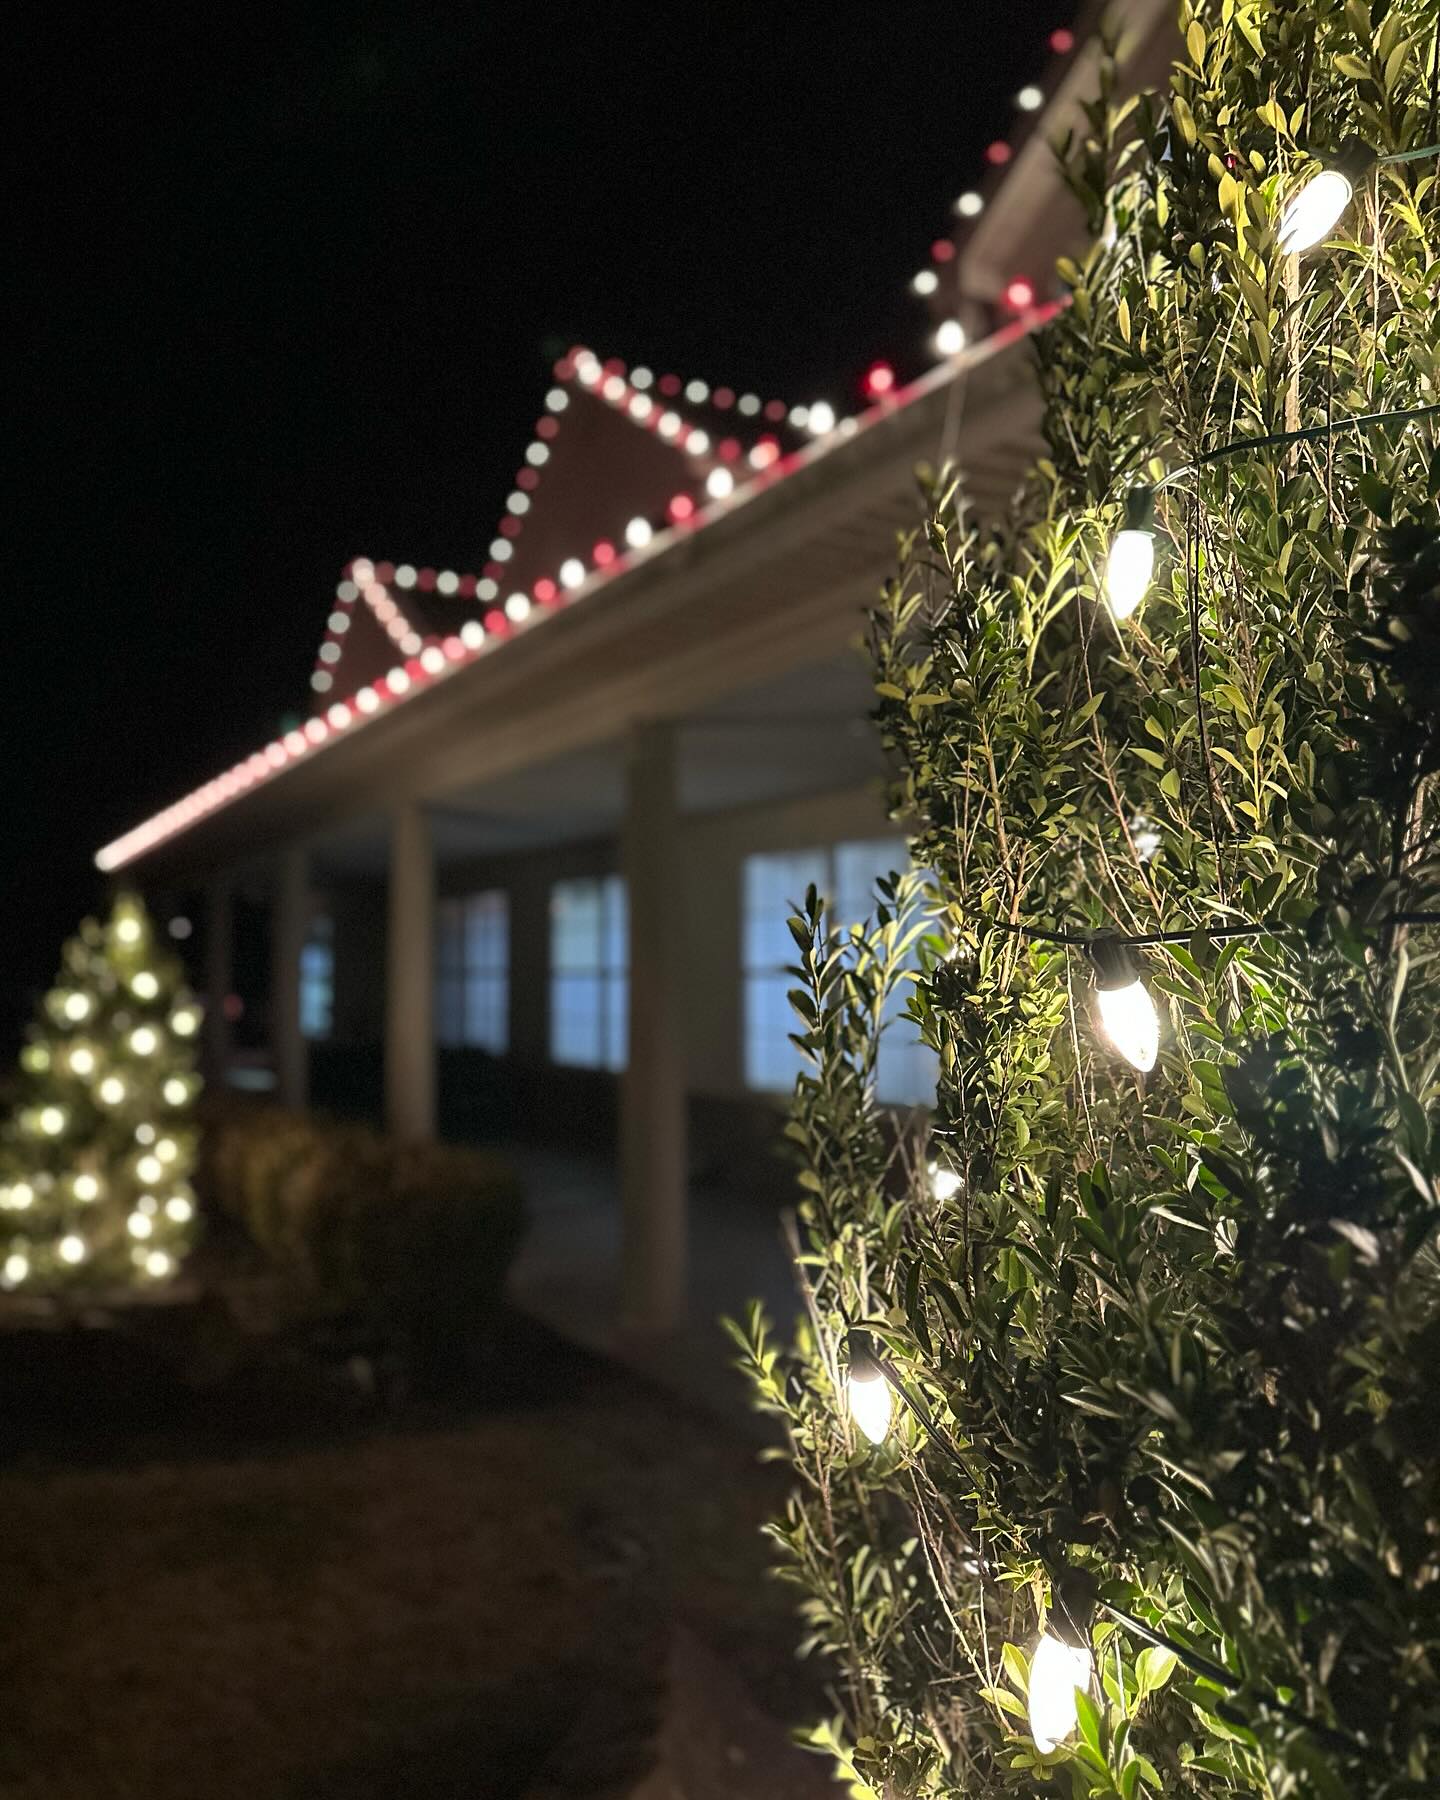 James shared another photo of Christmas-lit bushes outside his Arkansas home